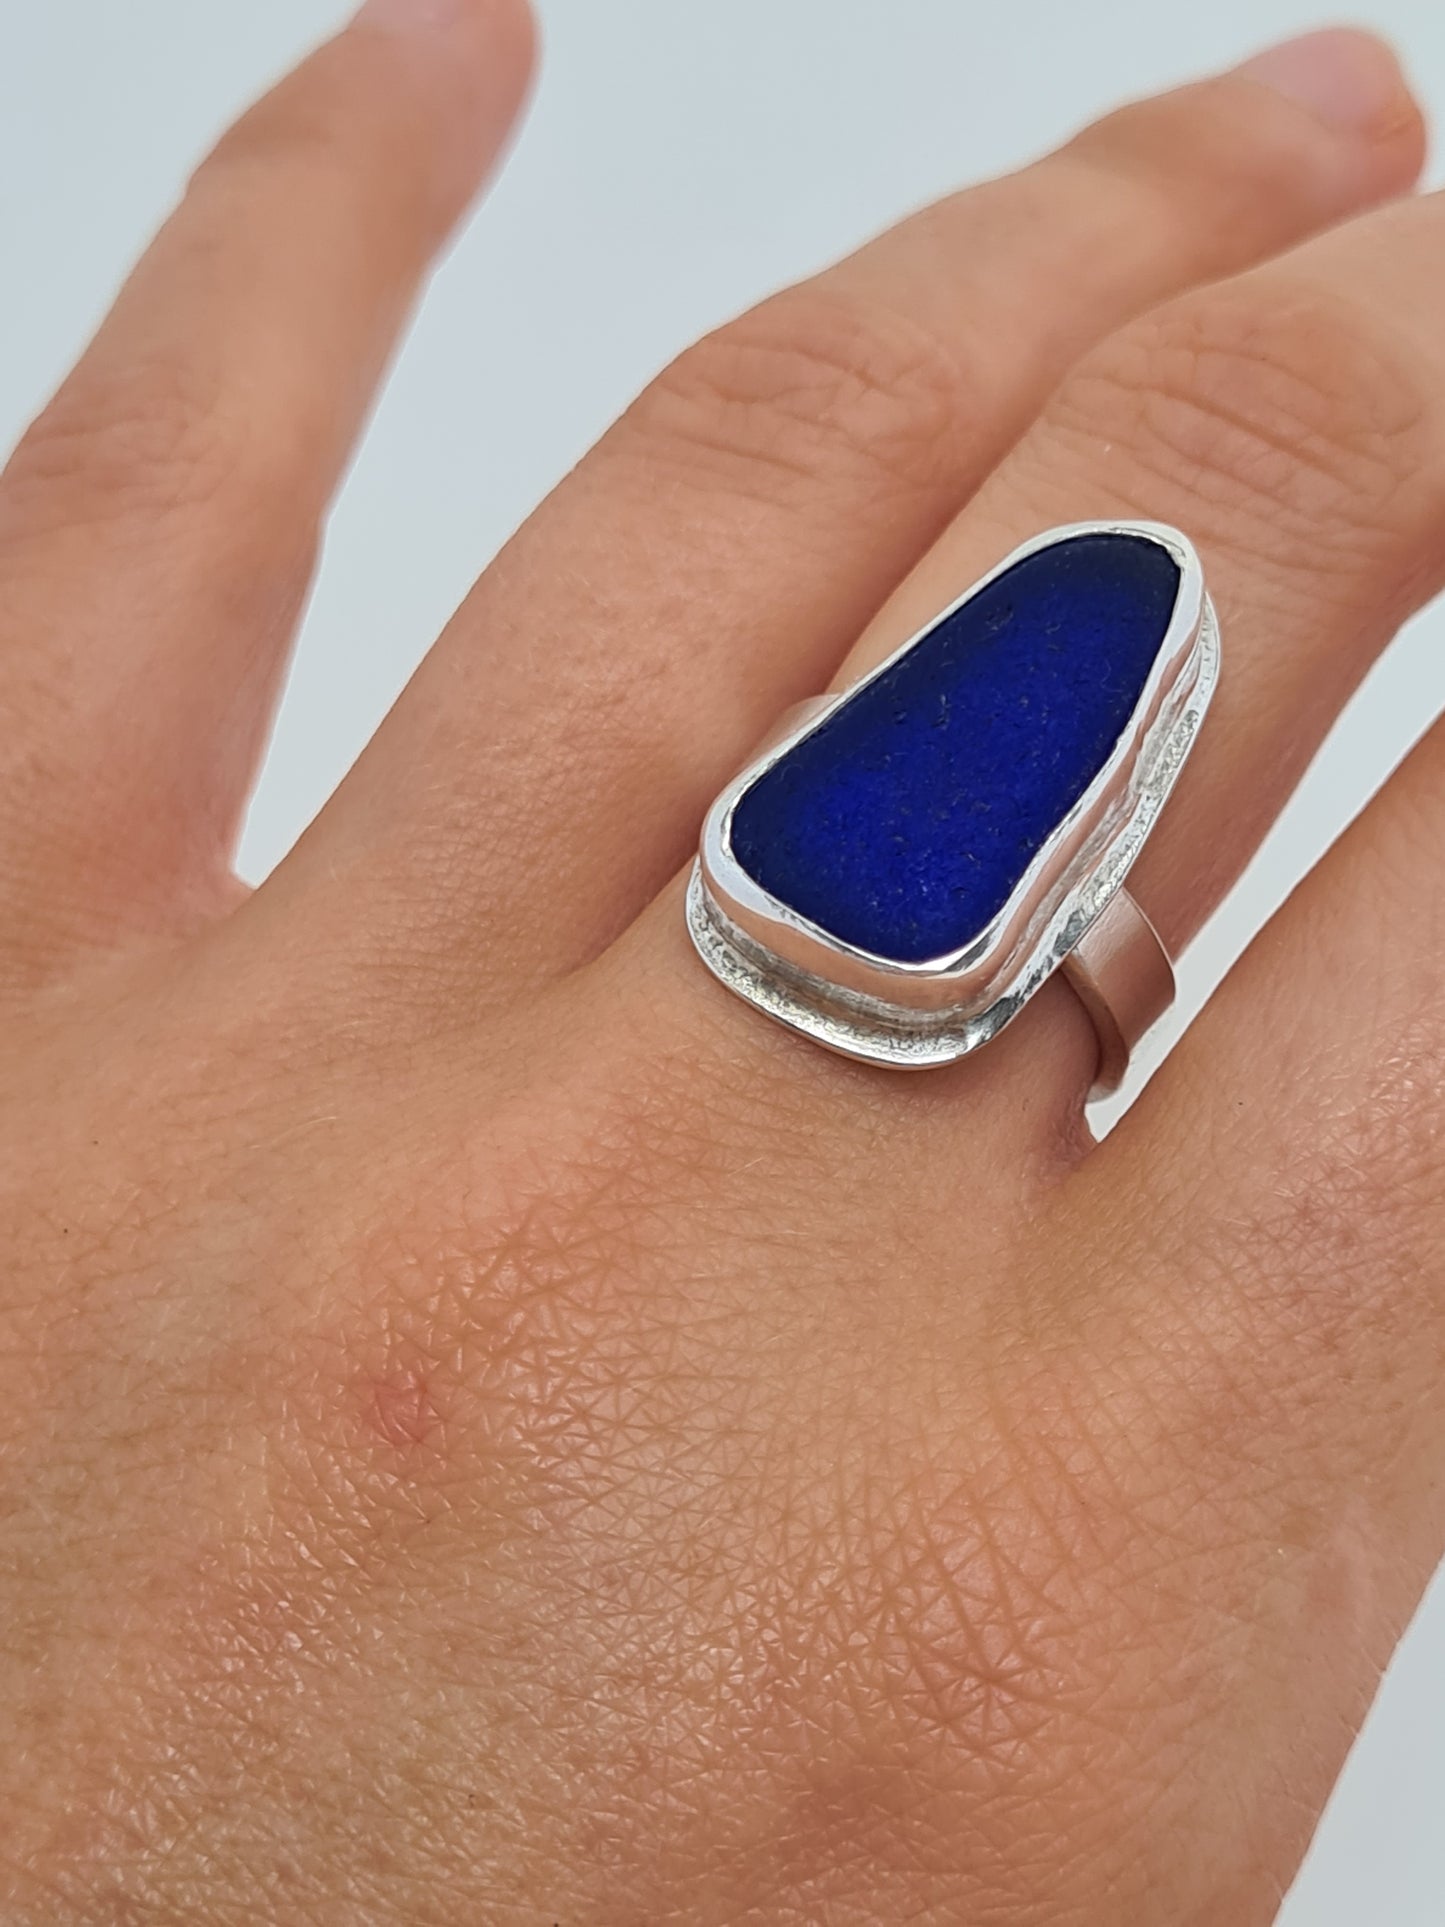 This rare and beautiful blue sea glass is cradled in a sterling silver bezel set upon a thick band. Made with sustainability in mind this handmade silver ring is made from 100% recycled silver.